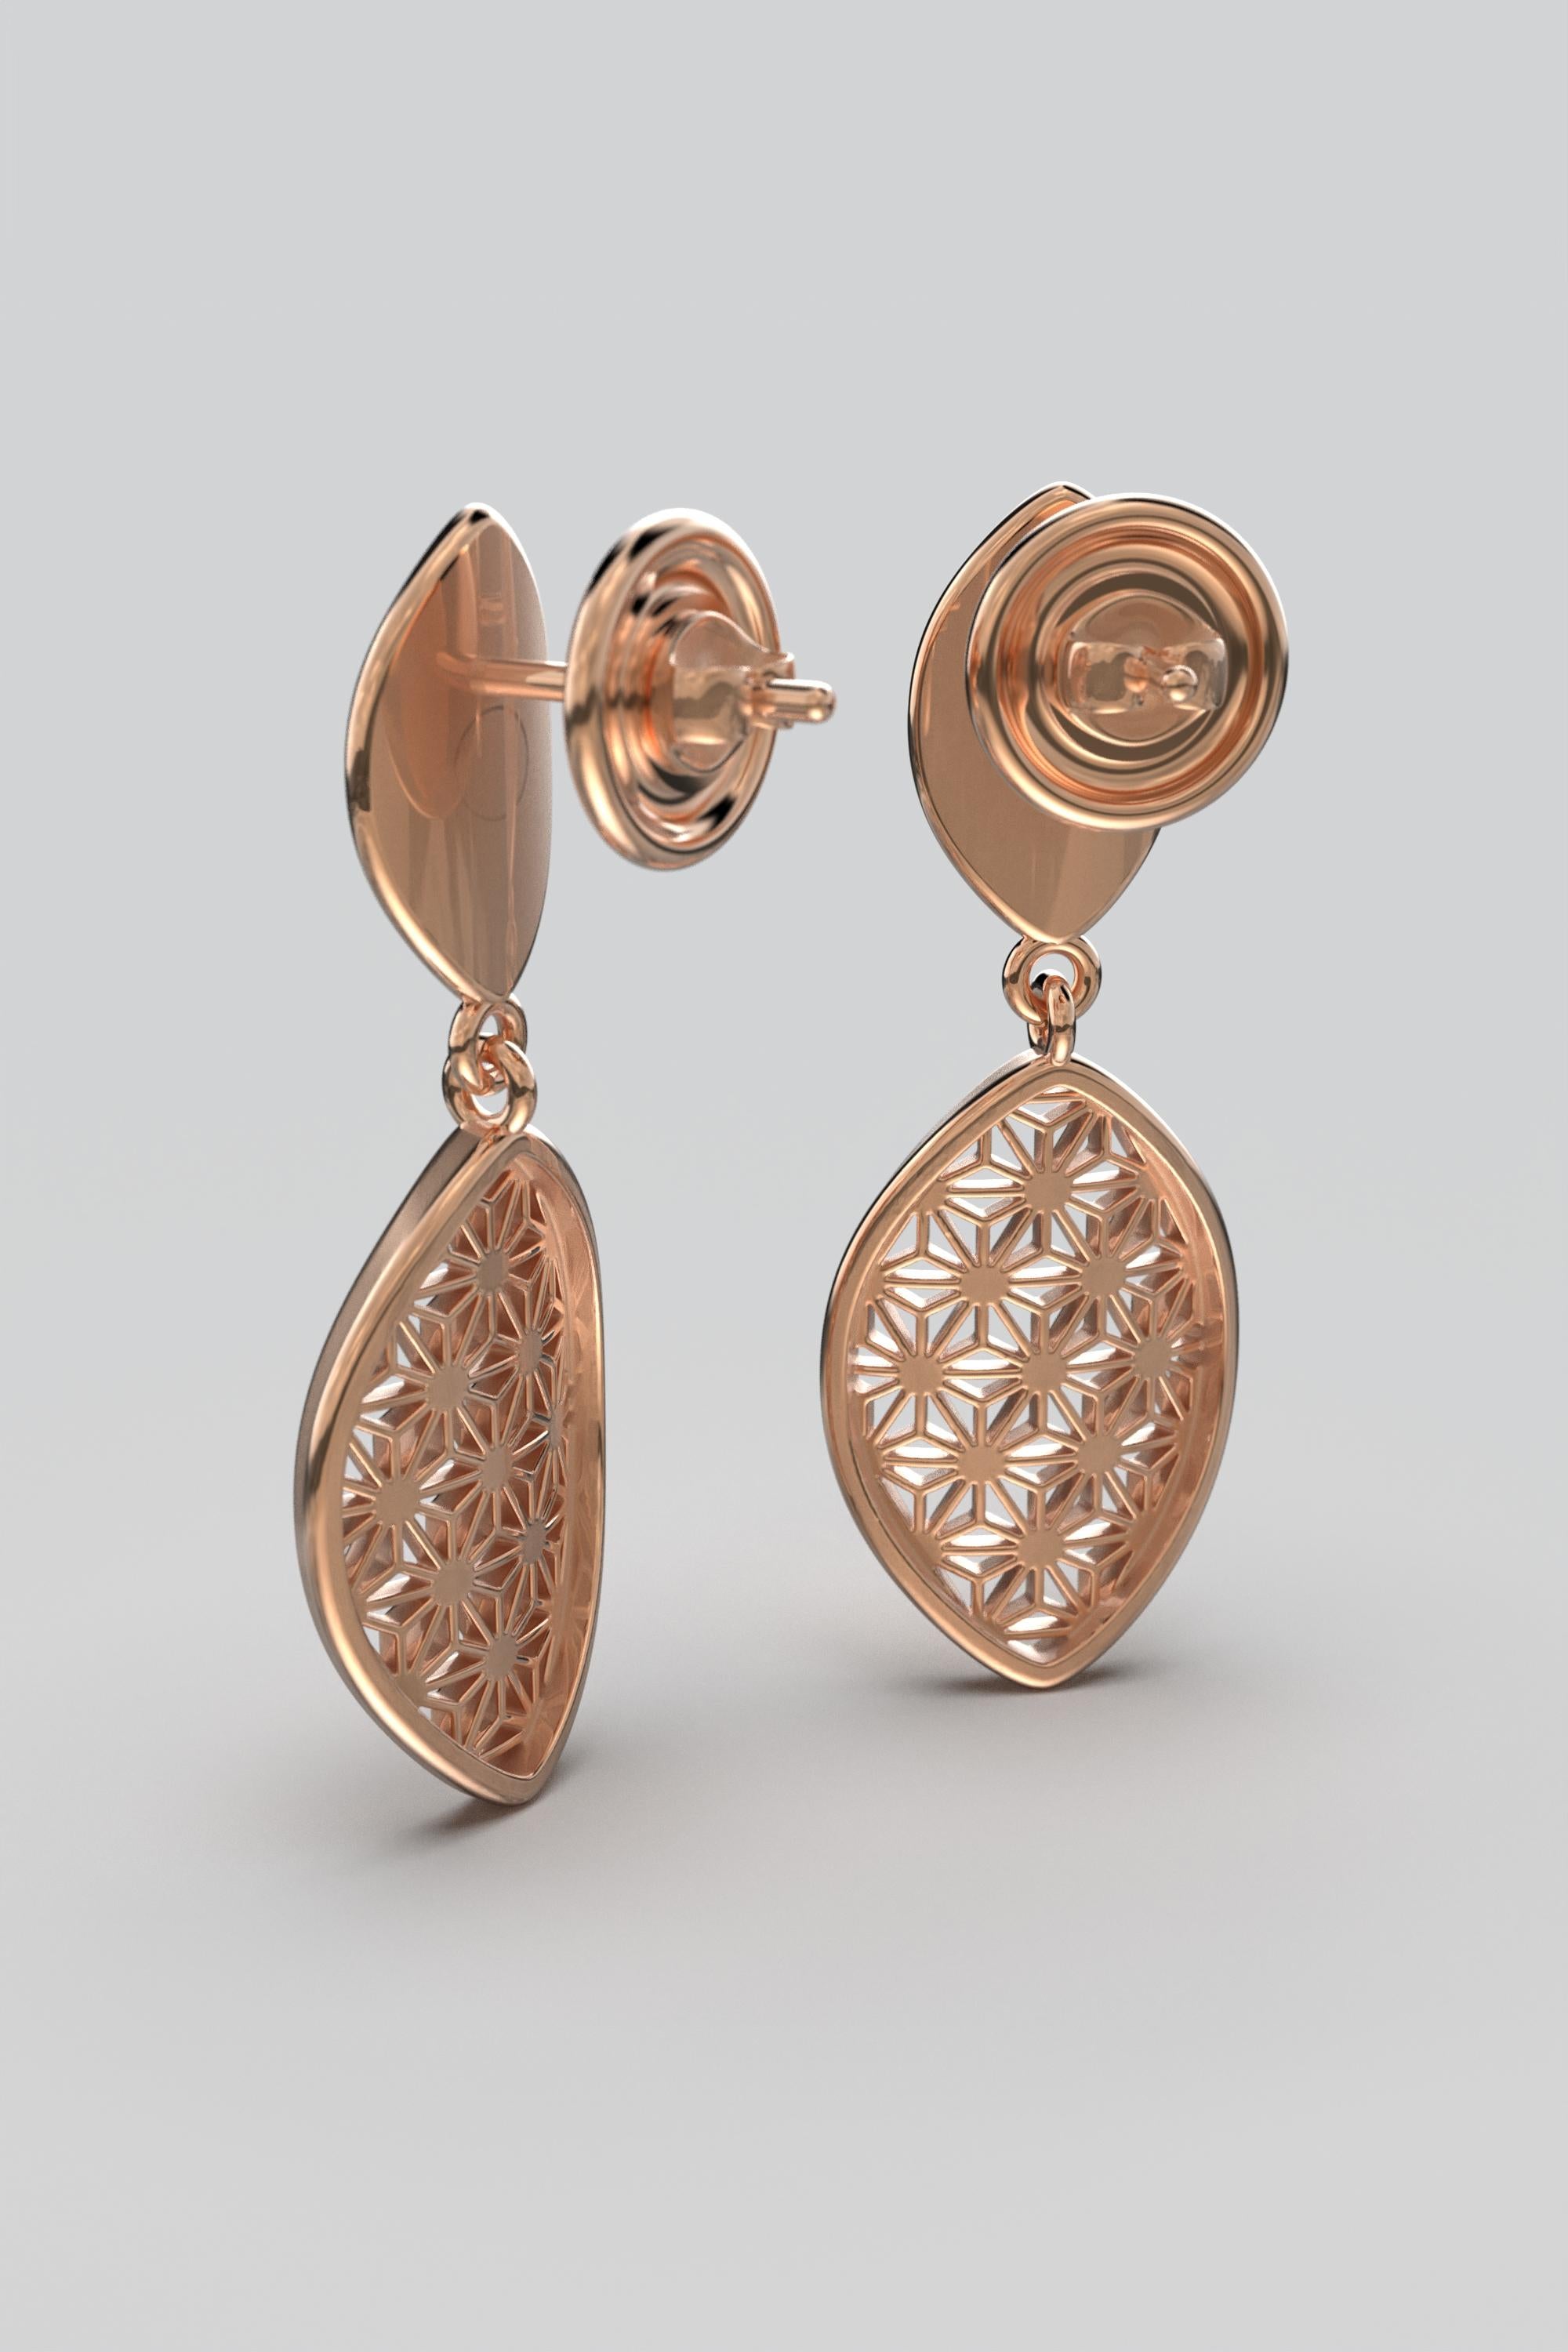 Modern Sashiko Pattern Earrings Made in Italy in 18k Gold By Oltremare Gioielli For Sale